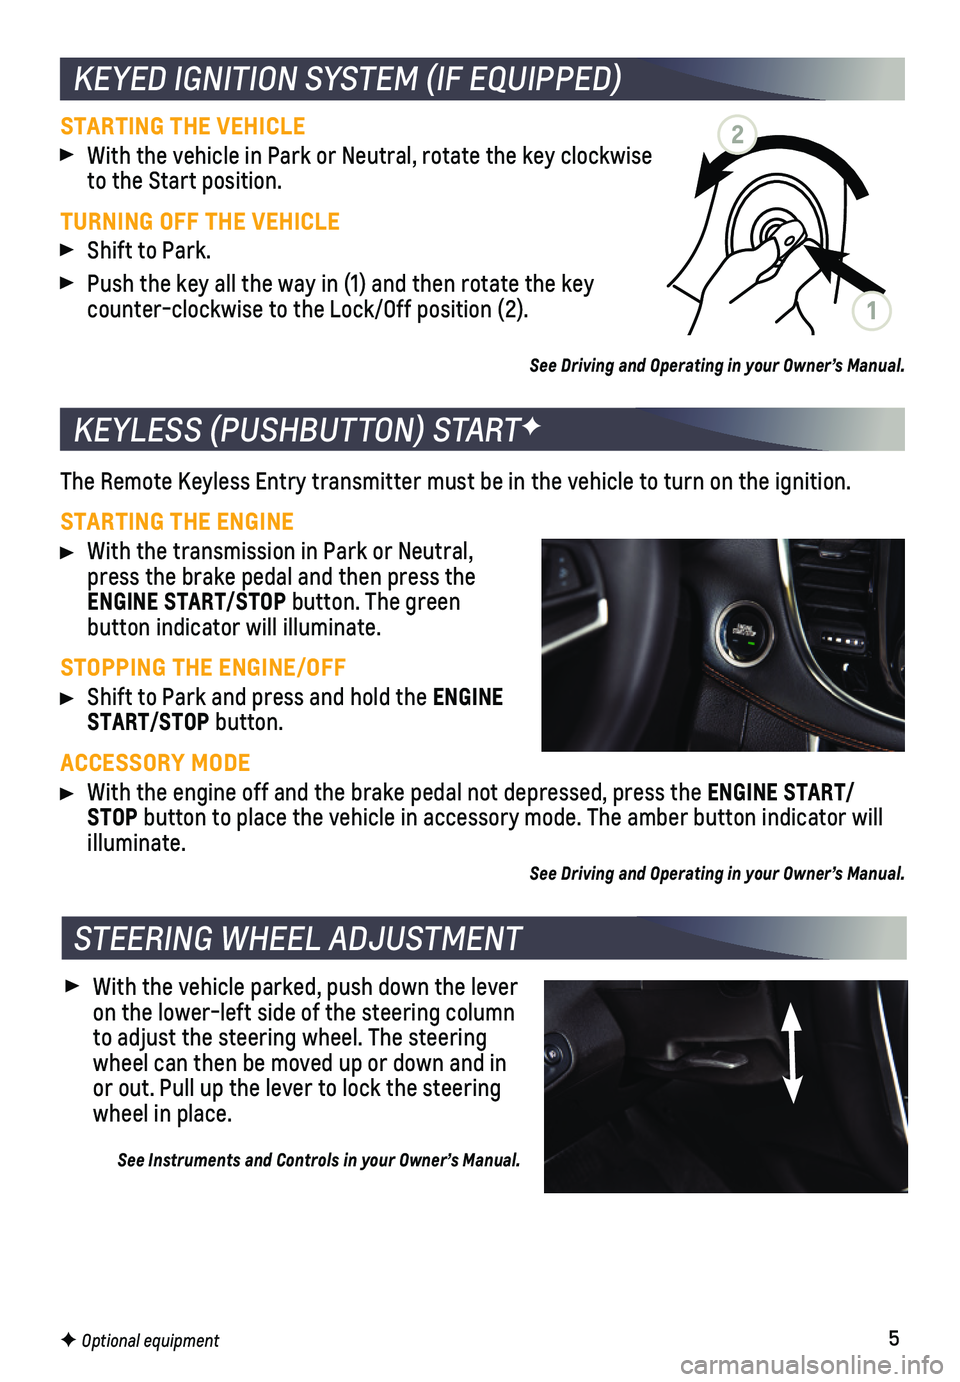 CHEVROLET TRAX 2019  Get To Know Guide 5
 With the vehicle parked, push down the lever on the lower-left side of the steering   column to adjust the steering wheel. The steering wheel can then be moved up or down and in or out. Pull up the